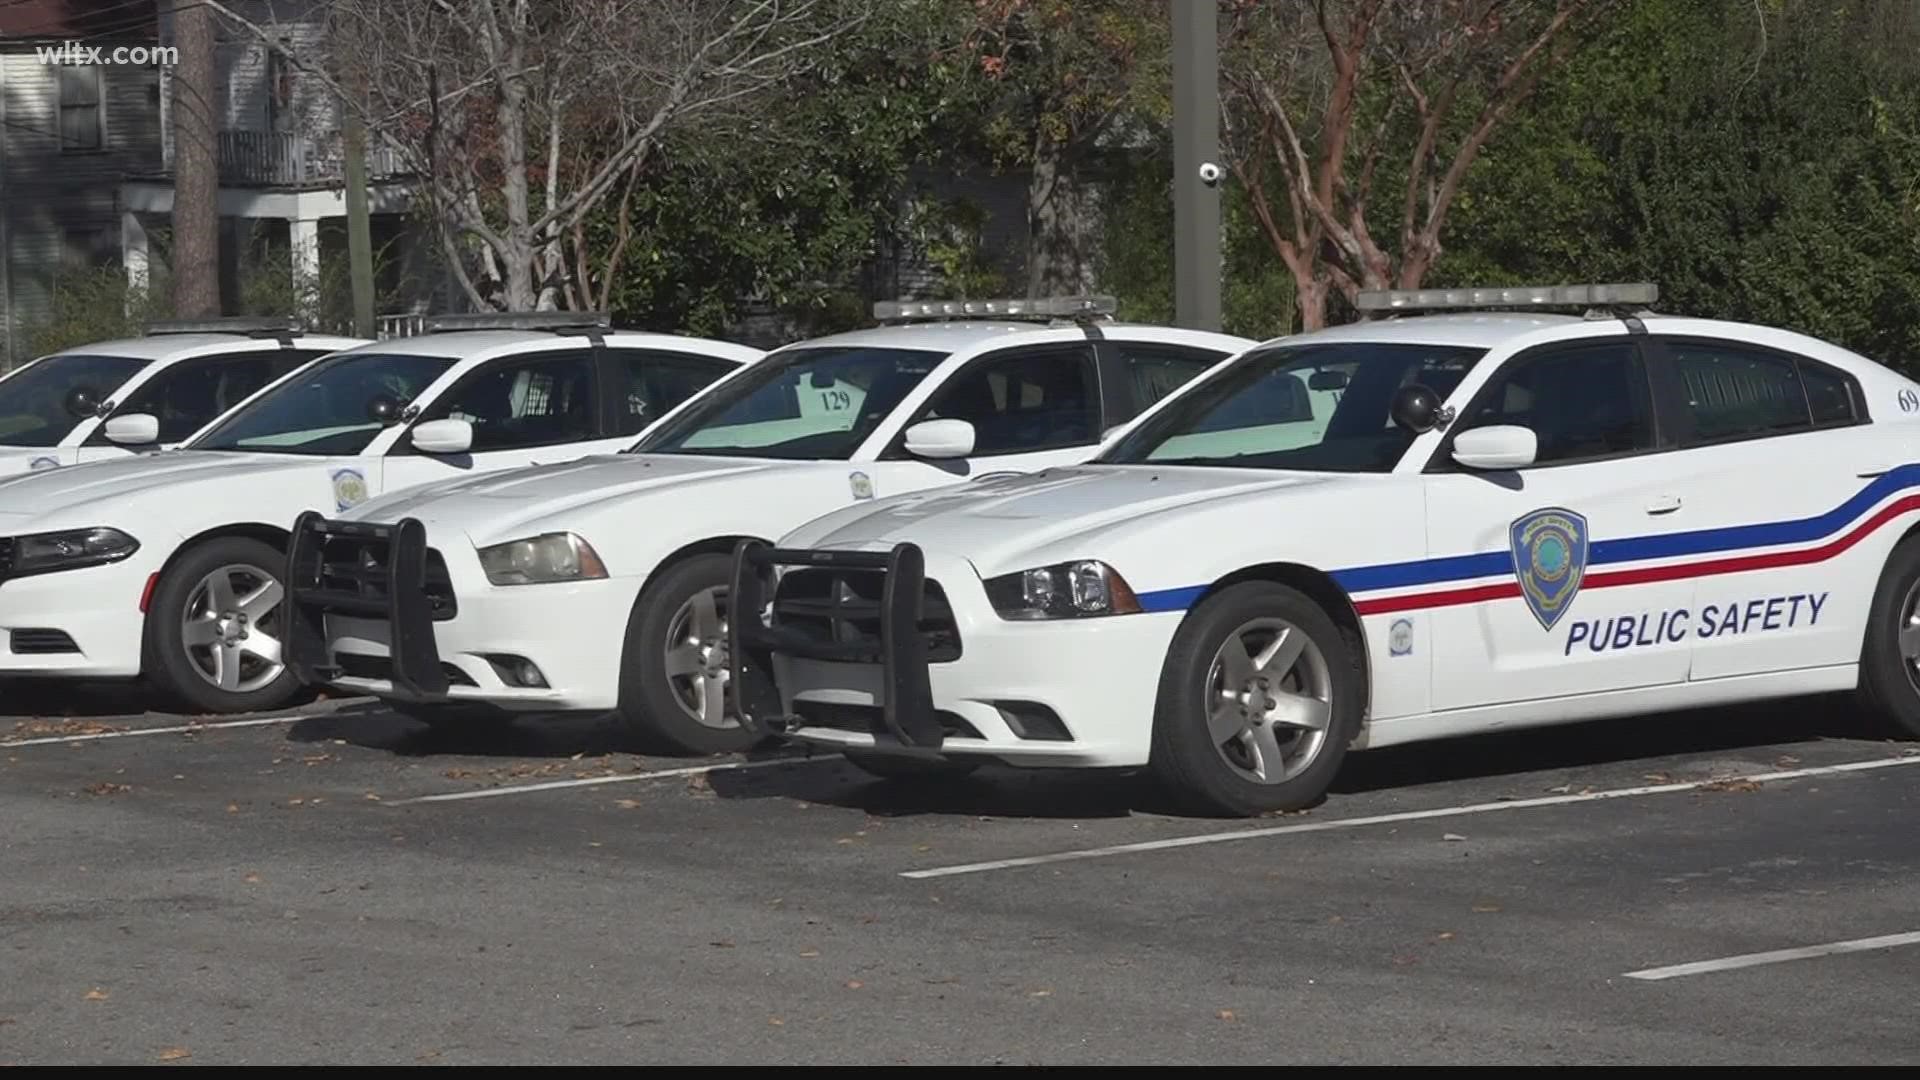 The Orangeburg Department of Public Safety is cracking down on carjackings with the launch of a new task force.